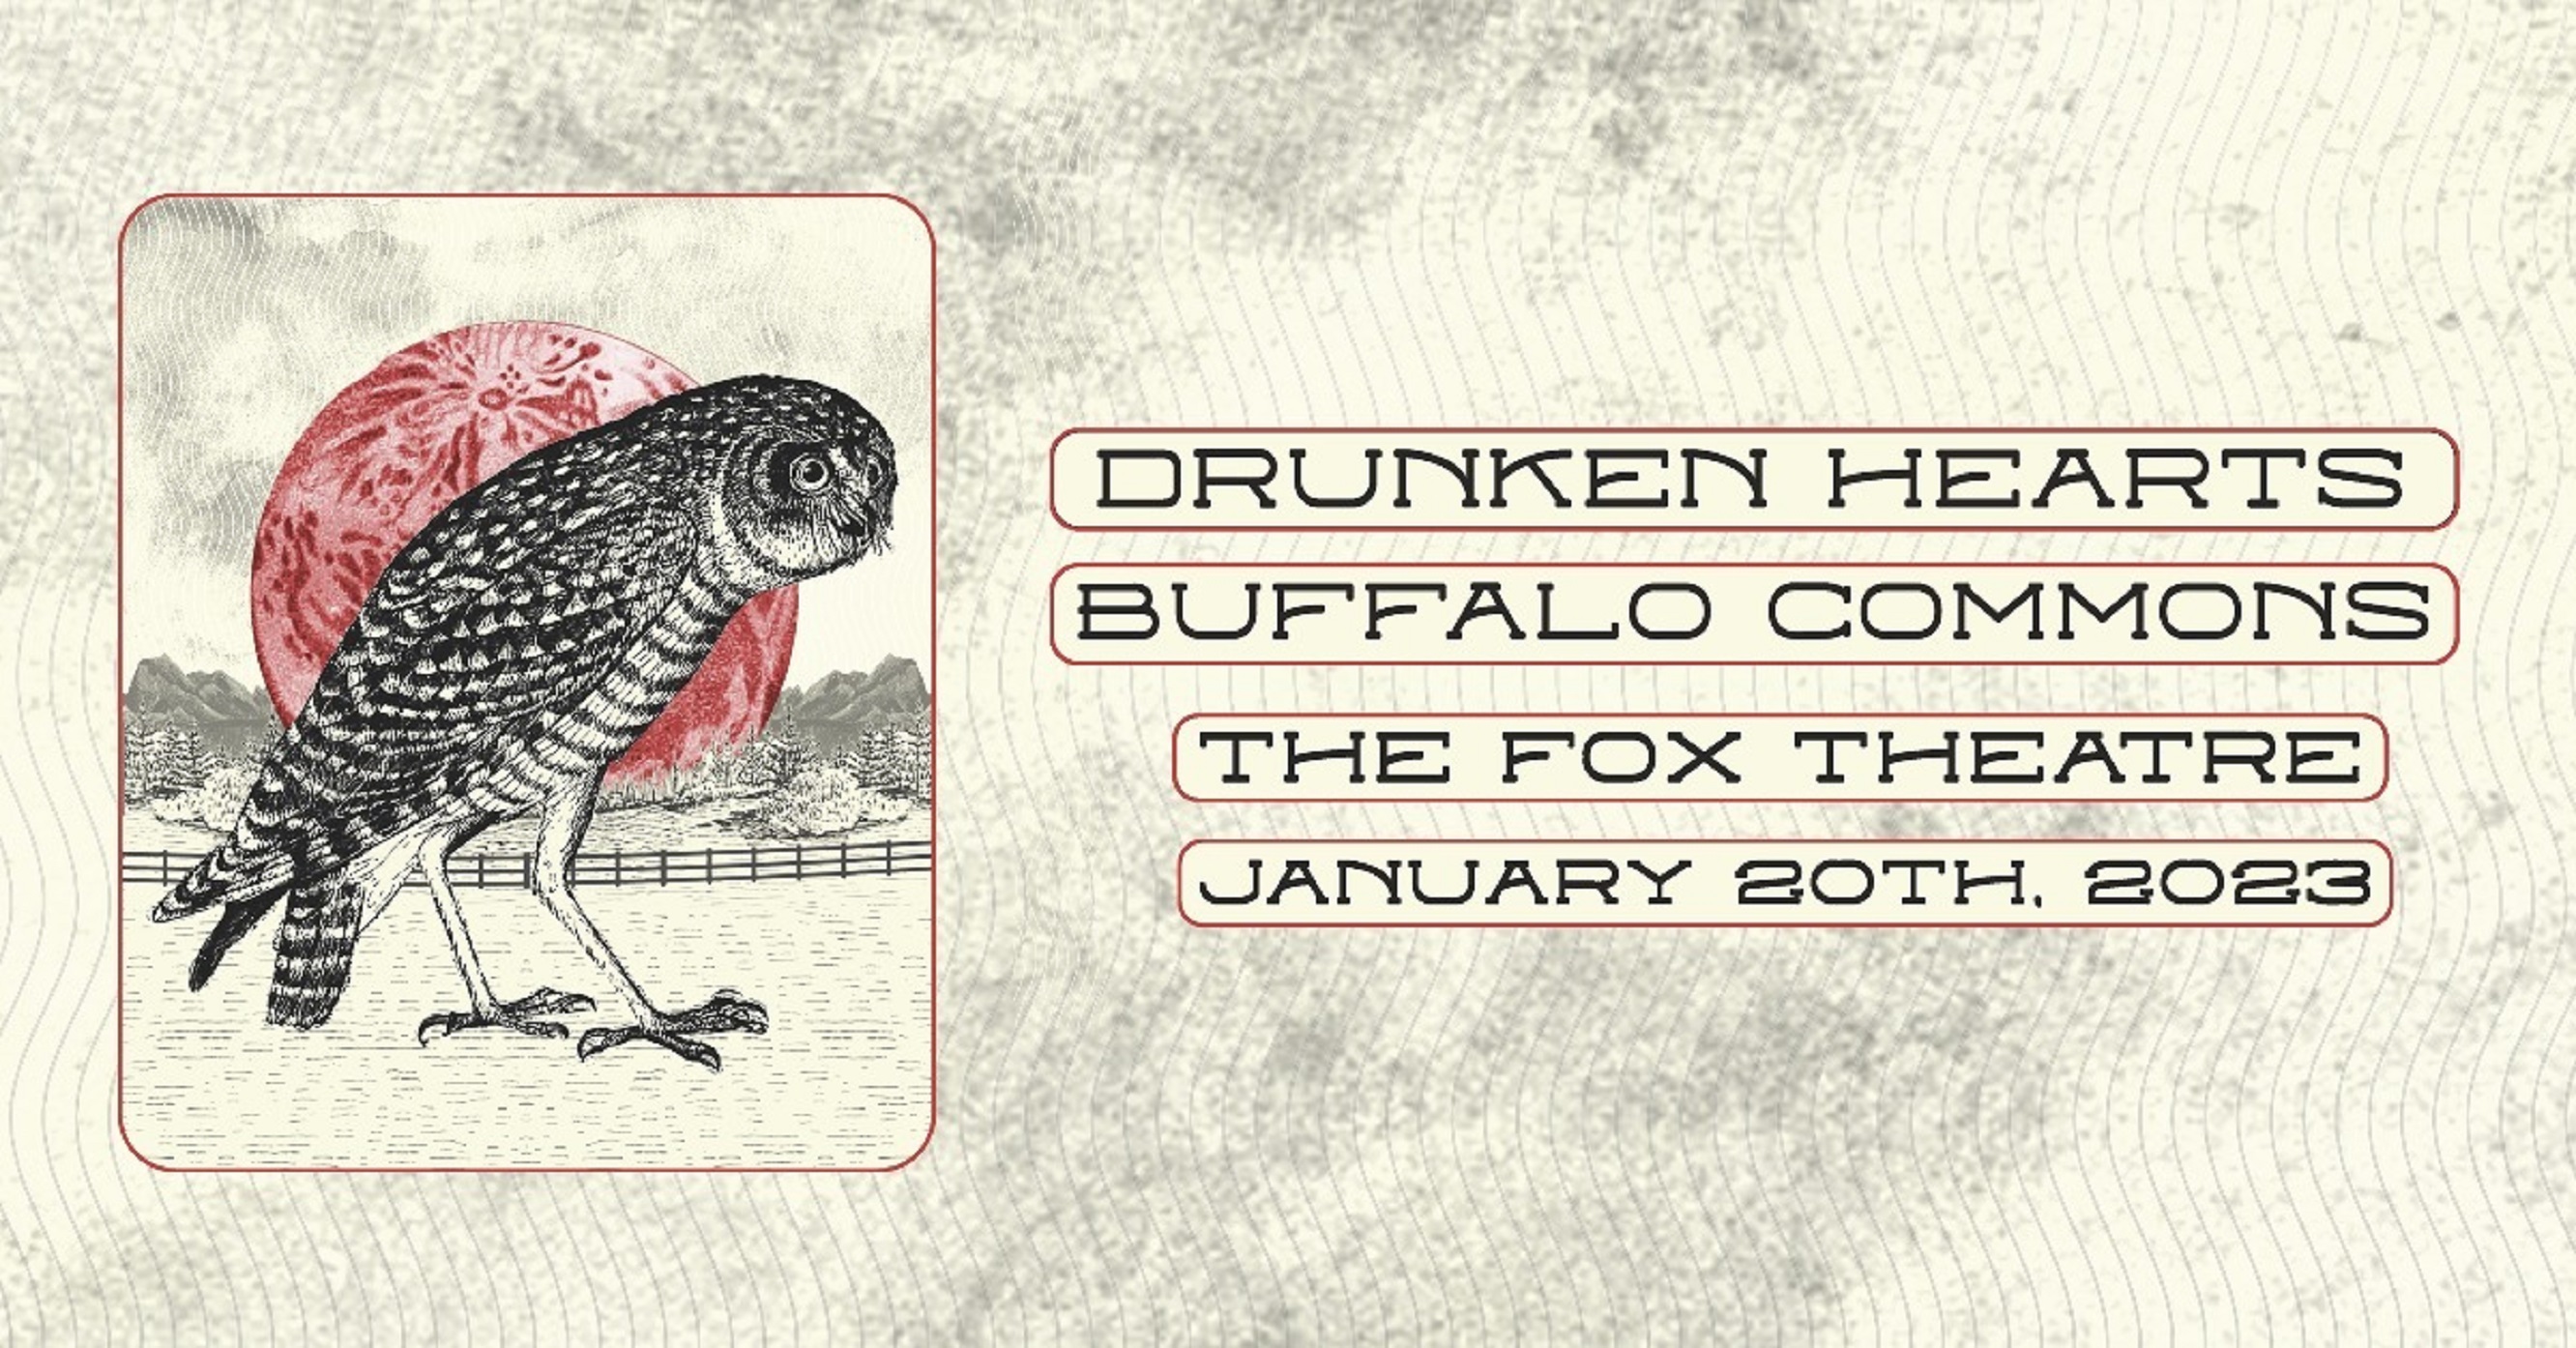 Drunken Hearts + Buffalo Commons coming to The Fox Theatre - 1/20/23